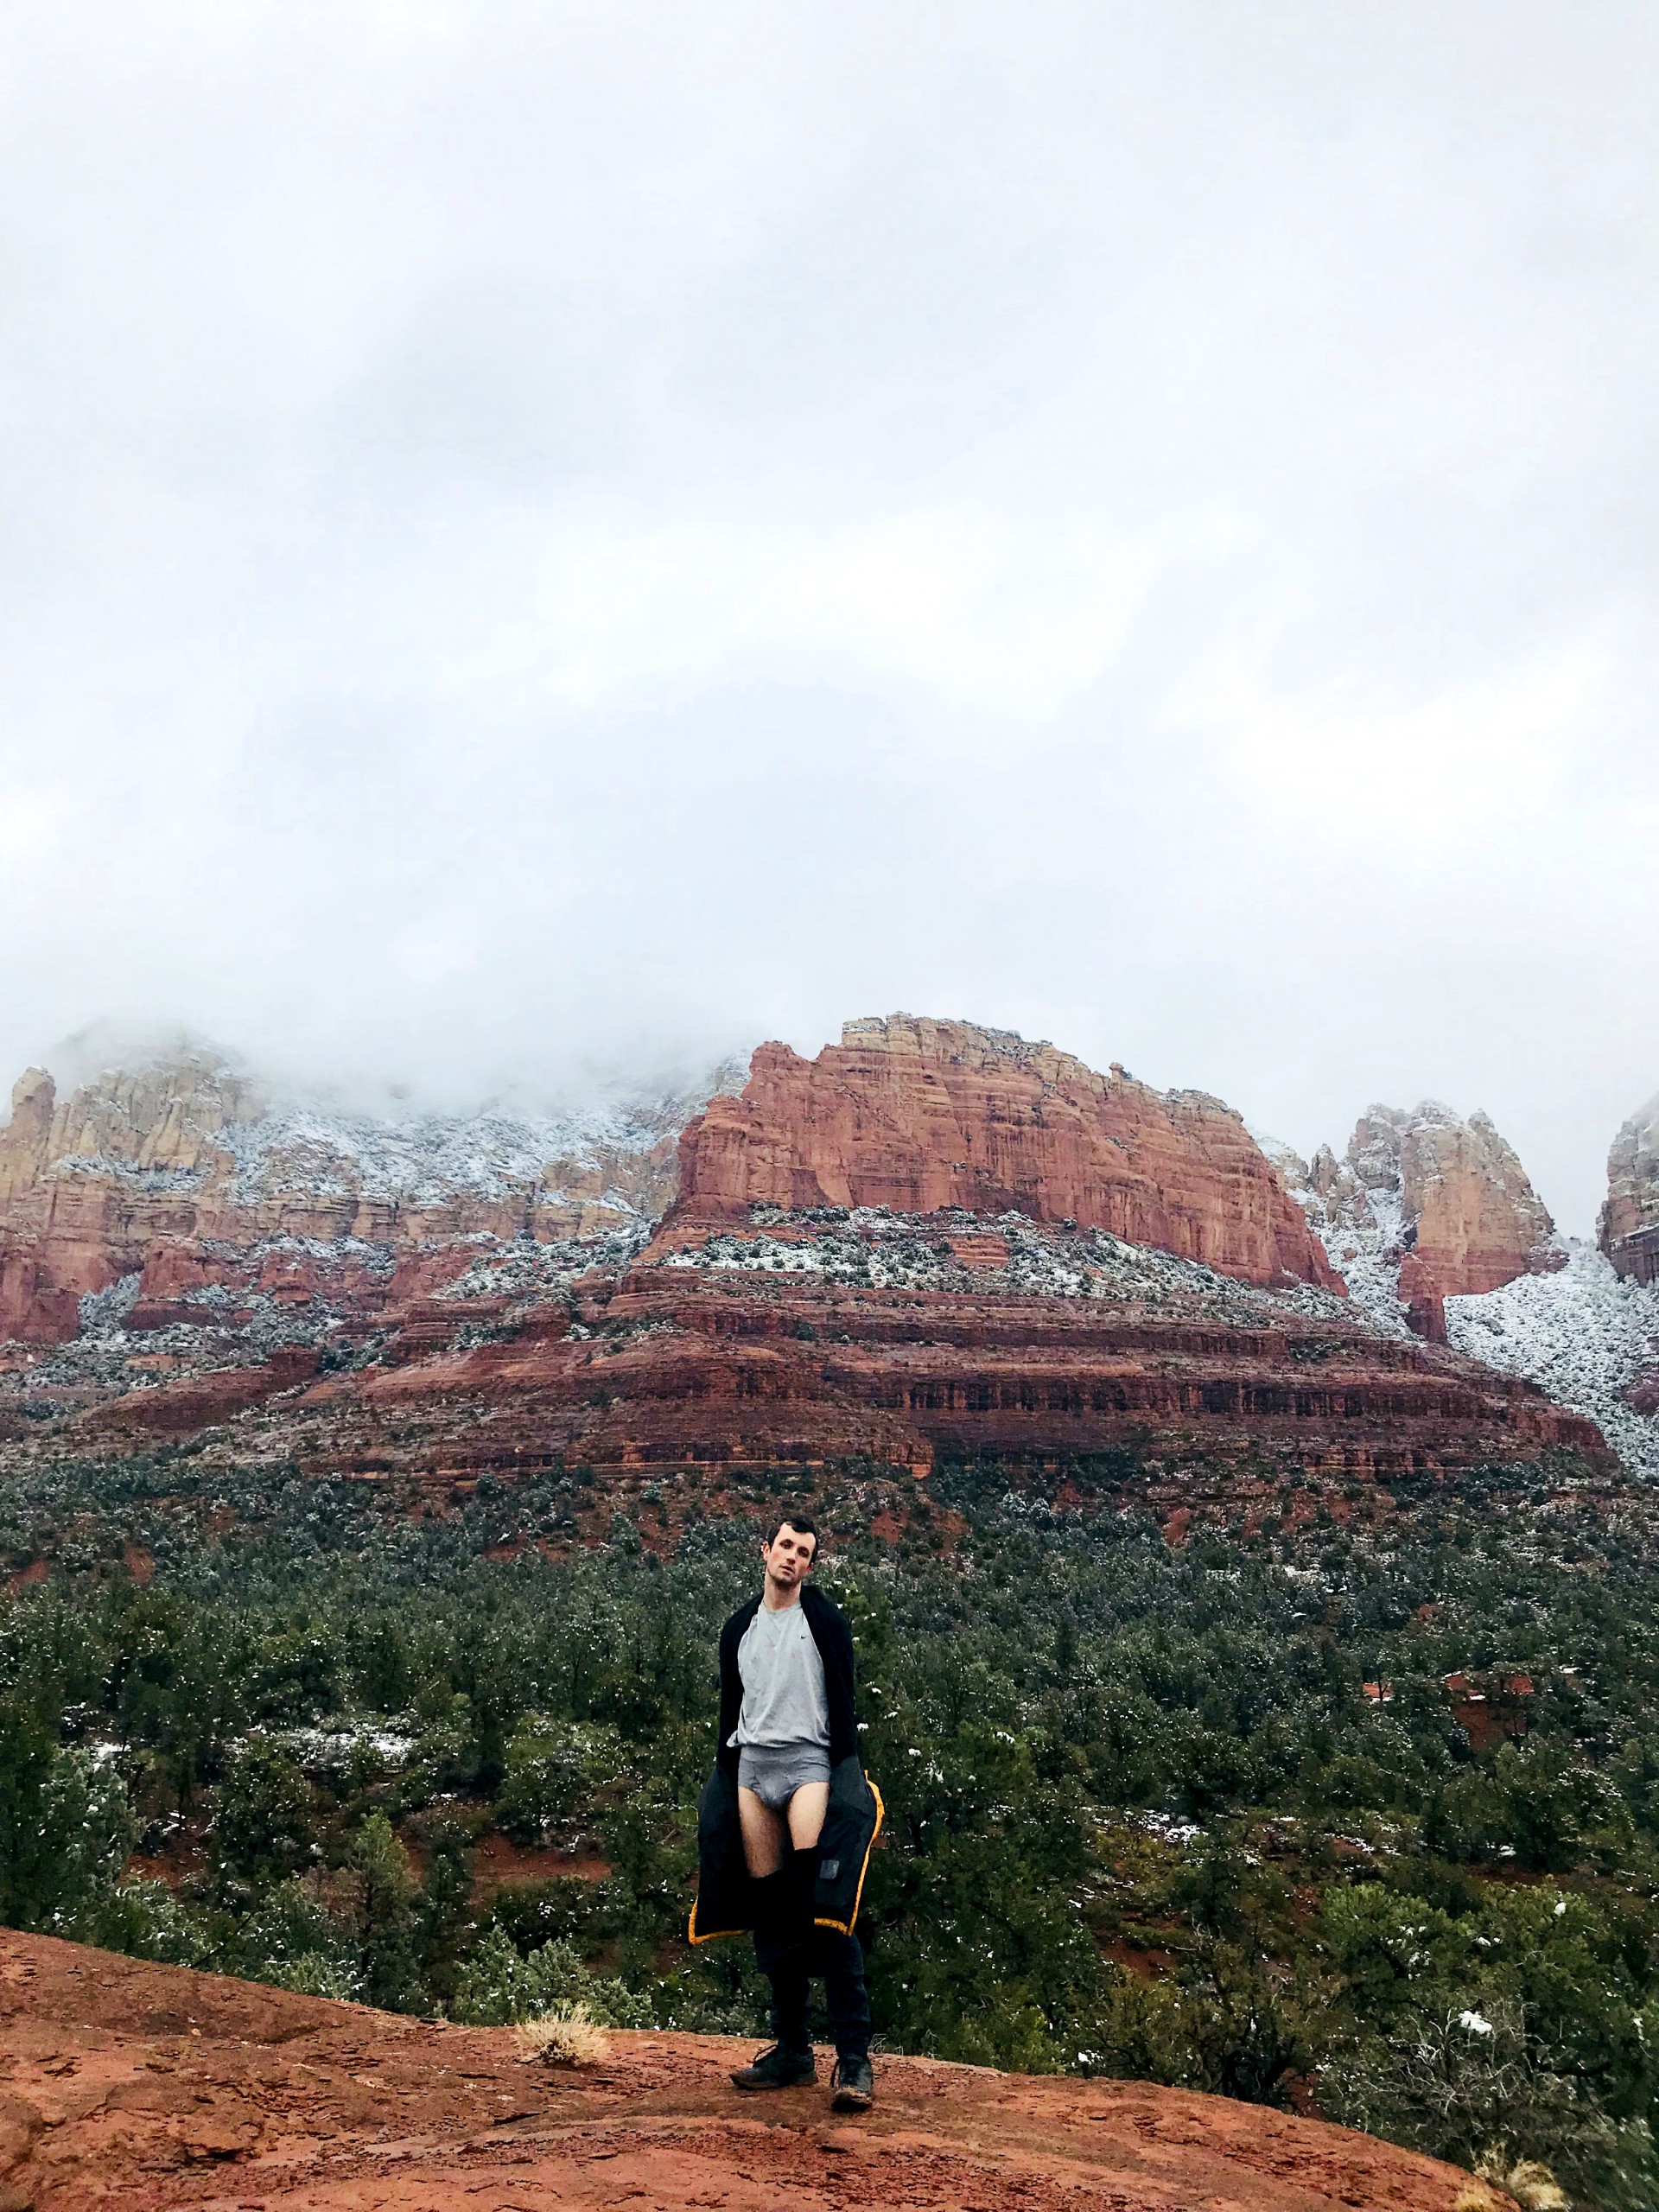 “Photograph of snow topped canyon in Sedona Arizona. Landscape covered in mist. Male model stands in center foreground of image with pants pulled below waist exposing grey underwear.”